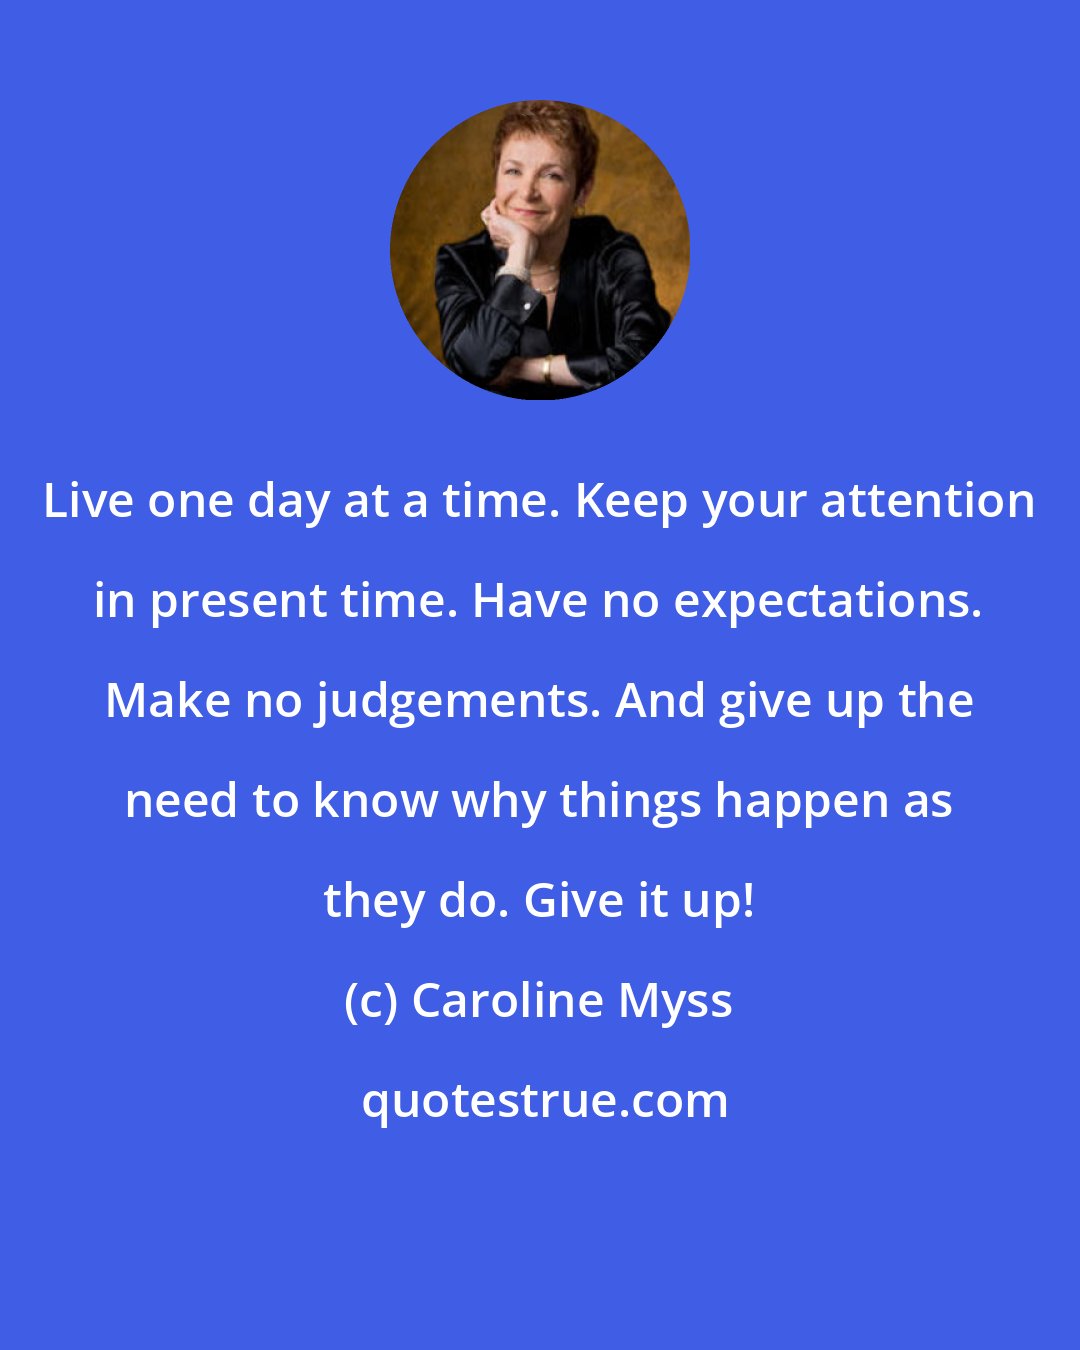 Caroline Myss: Live one day at a time. Keep your attention in present time. Have no expectations. Make no judgements. And give up the need to know why things happen as they do. Give it up!